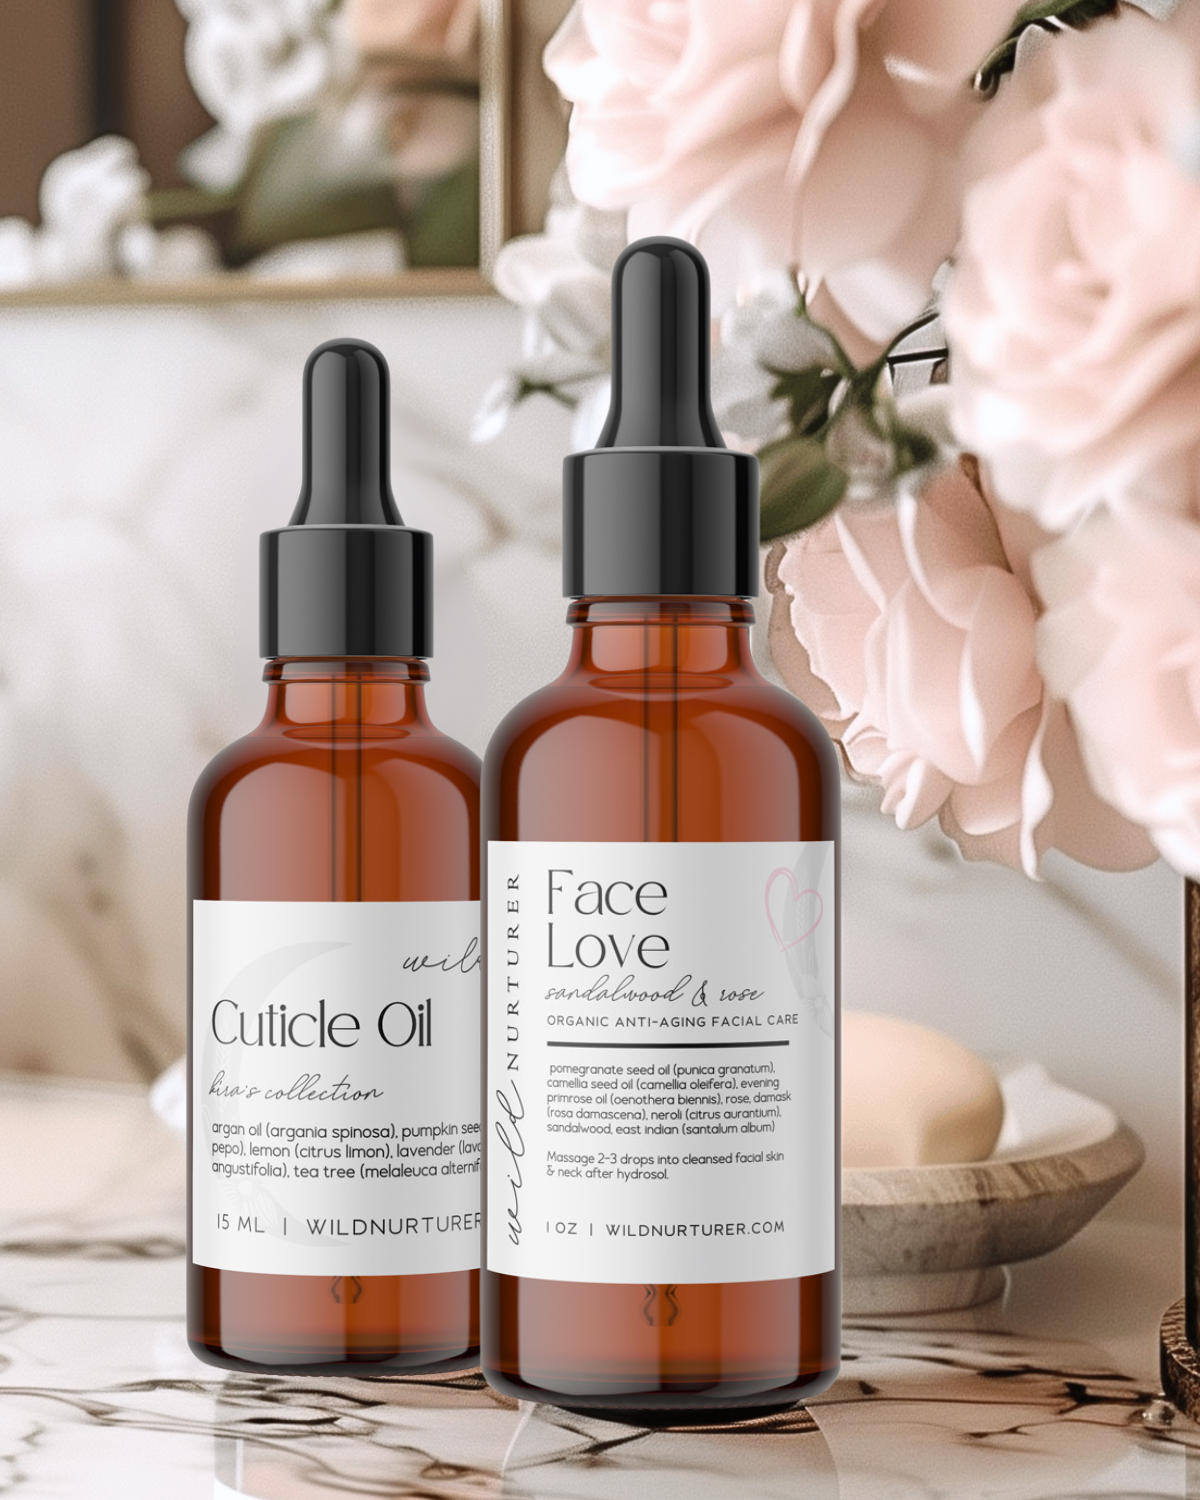 Two bottles of skincare oils labeled "Cuticle Oil" and "Face Love Oil" on a bathroom counter with decorative flowers in the background.